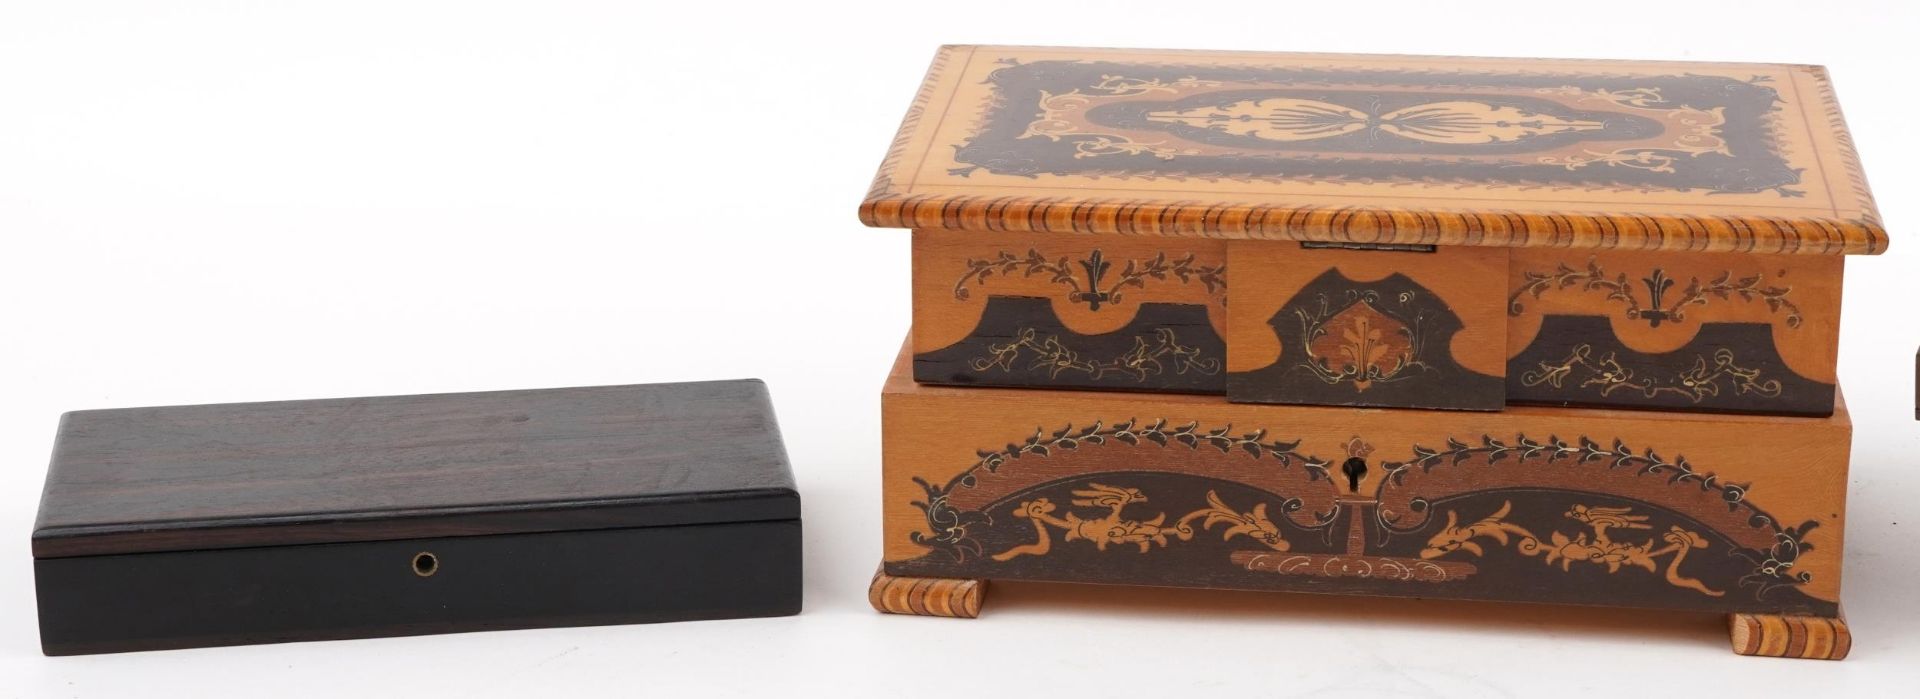 Wooden Sorento ware musical jewellery box, olive wood cantilever sewing box and an ebony box, the - Image 2 of 3